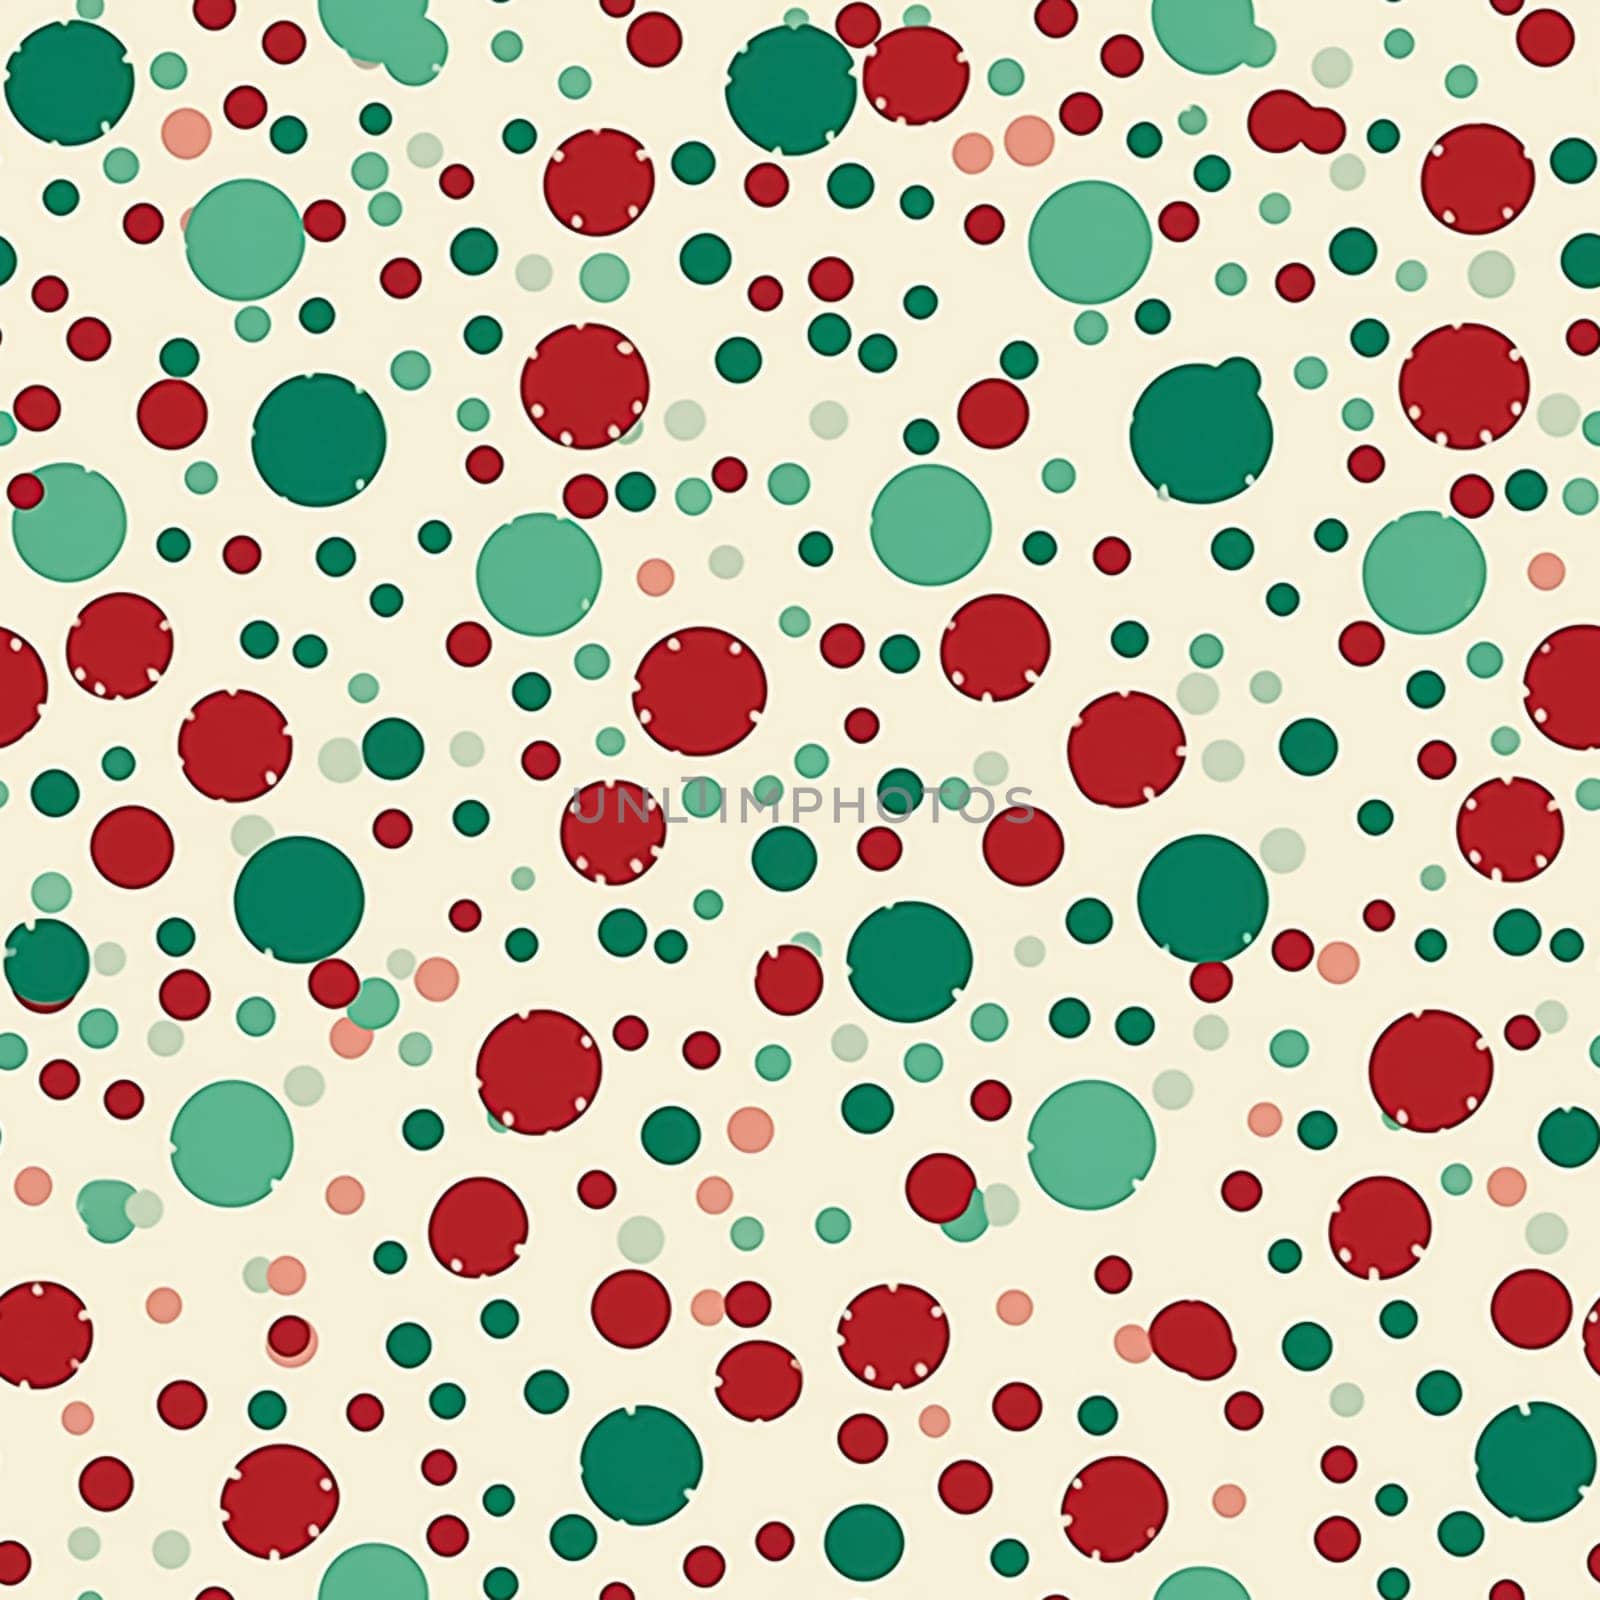 Seamless pattern, tileable festive polka dot country style print for dotted wallpaper, holiday wrapping paper, scrapbook, dots fabric and product design by Anneleven